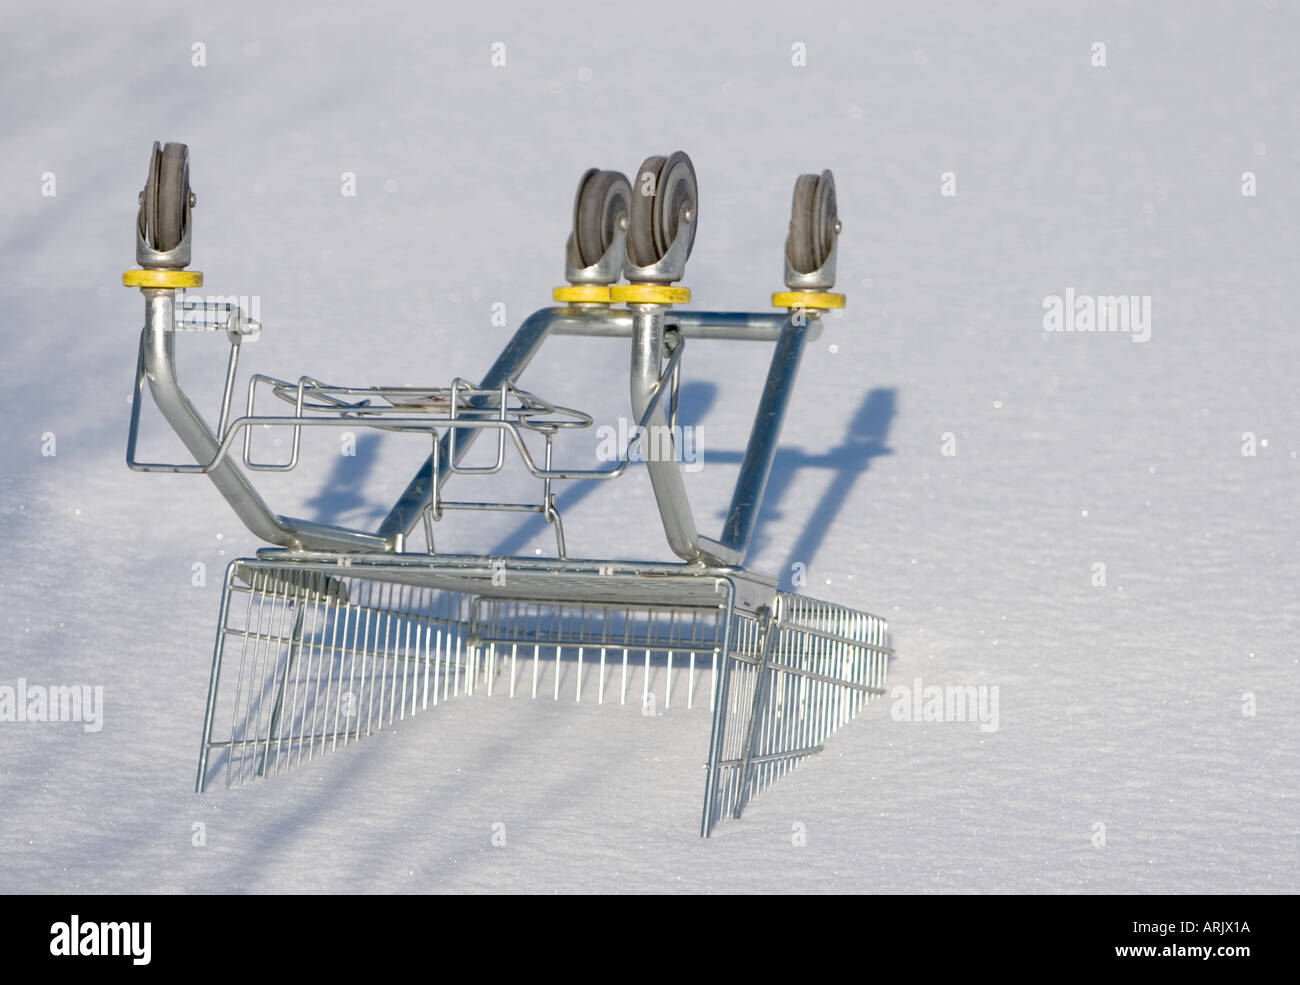 Shopping cart upside down outdoors and buried to snow , Finland Stock Photo